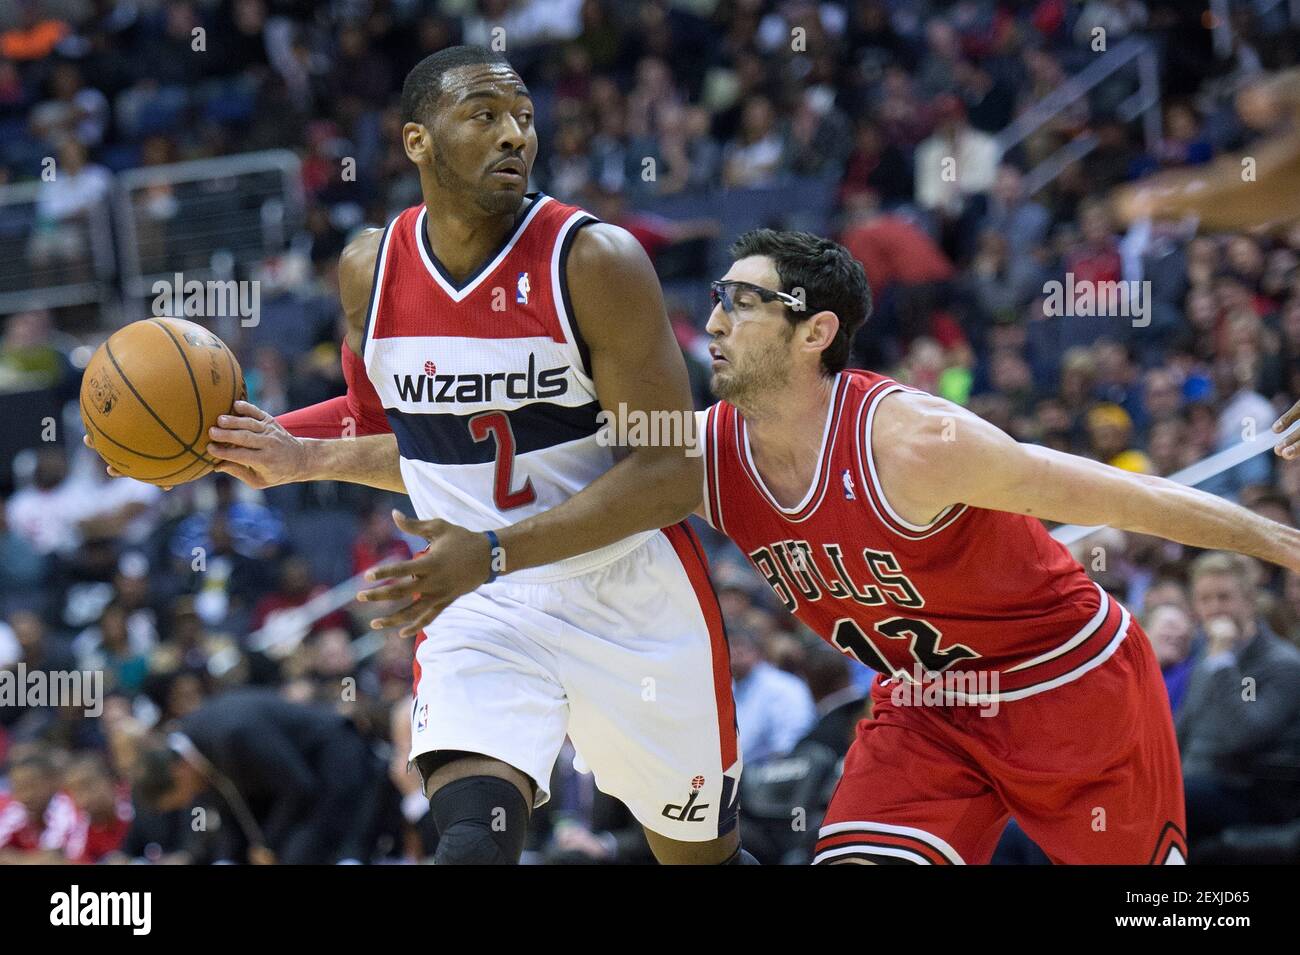 Chicago Bulls shooting guard Kirk Hinrich (12) tries to poke the ball away  from Washington Wizards point guard John Wall (2) during the second half of  their game played at the Verizon